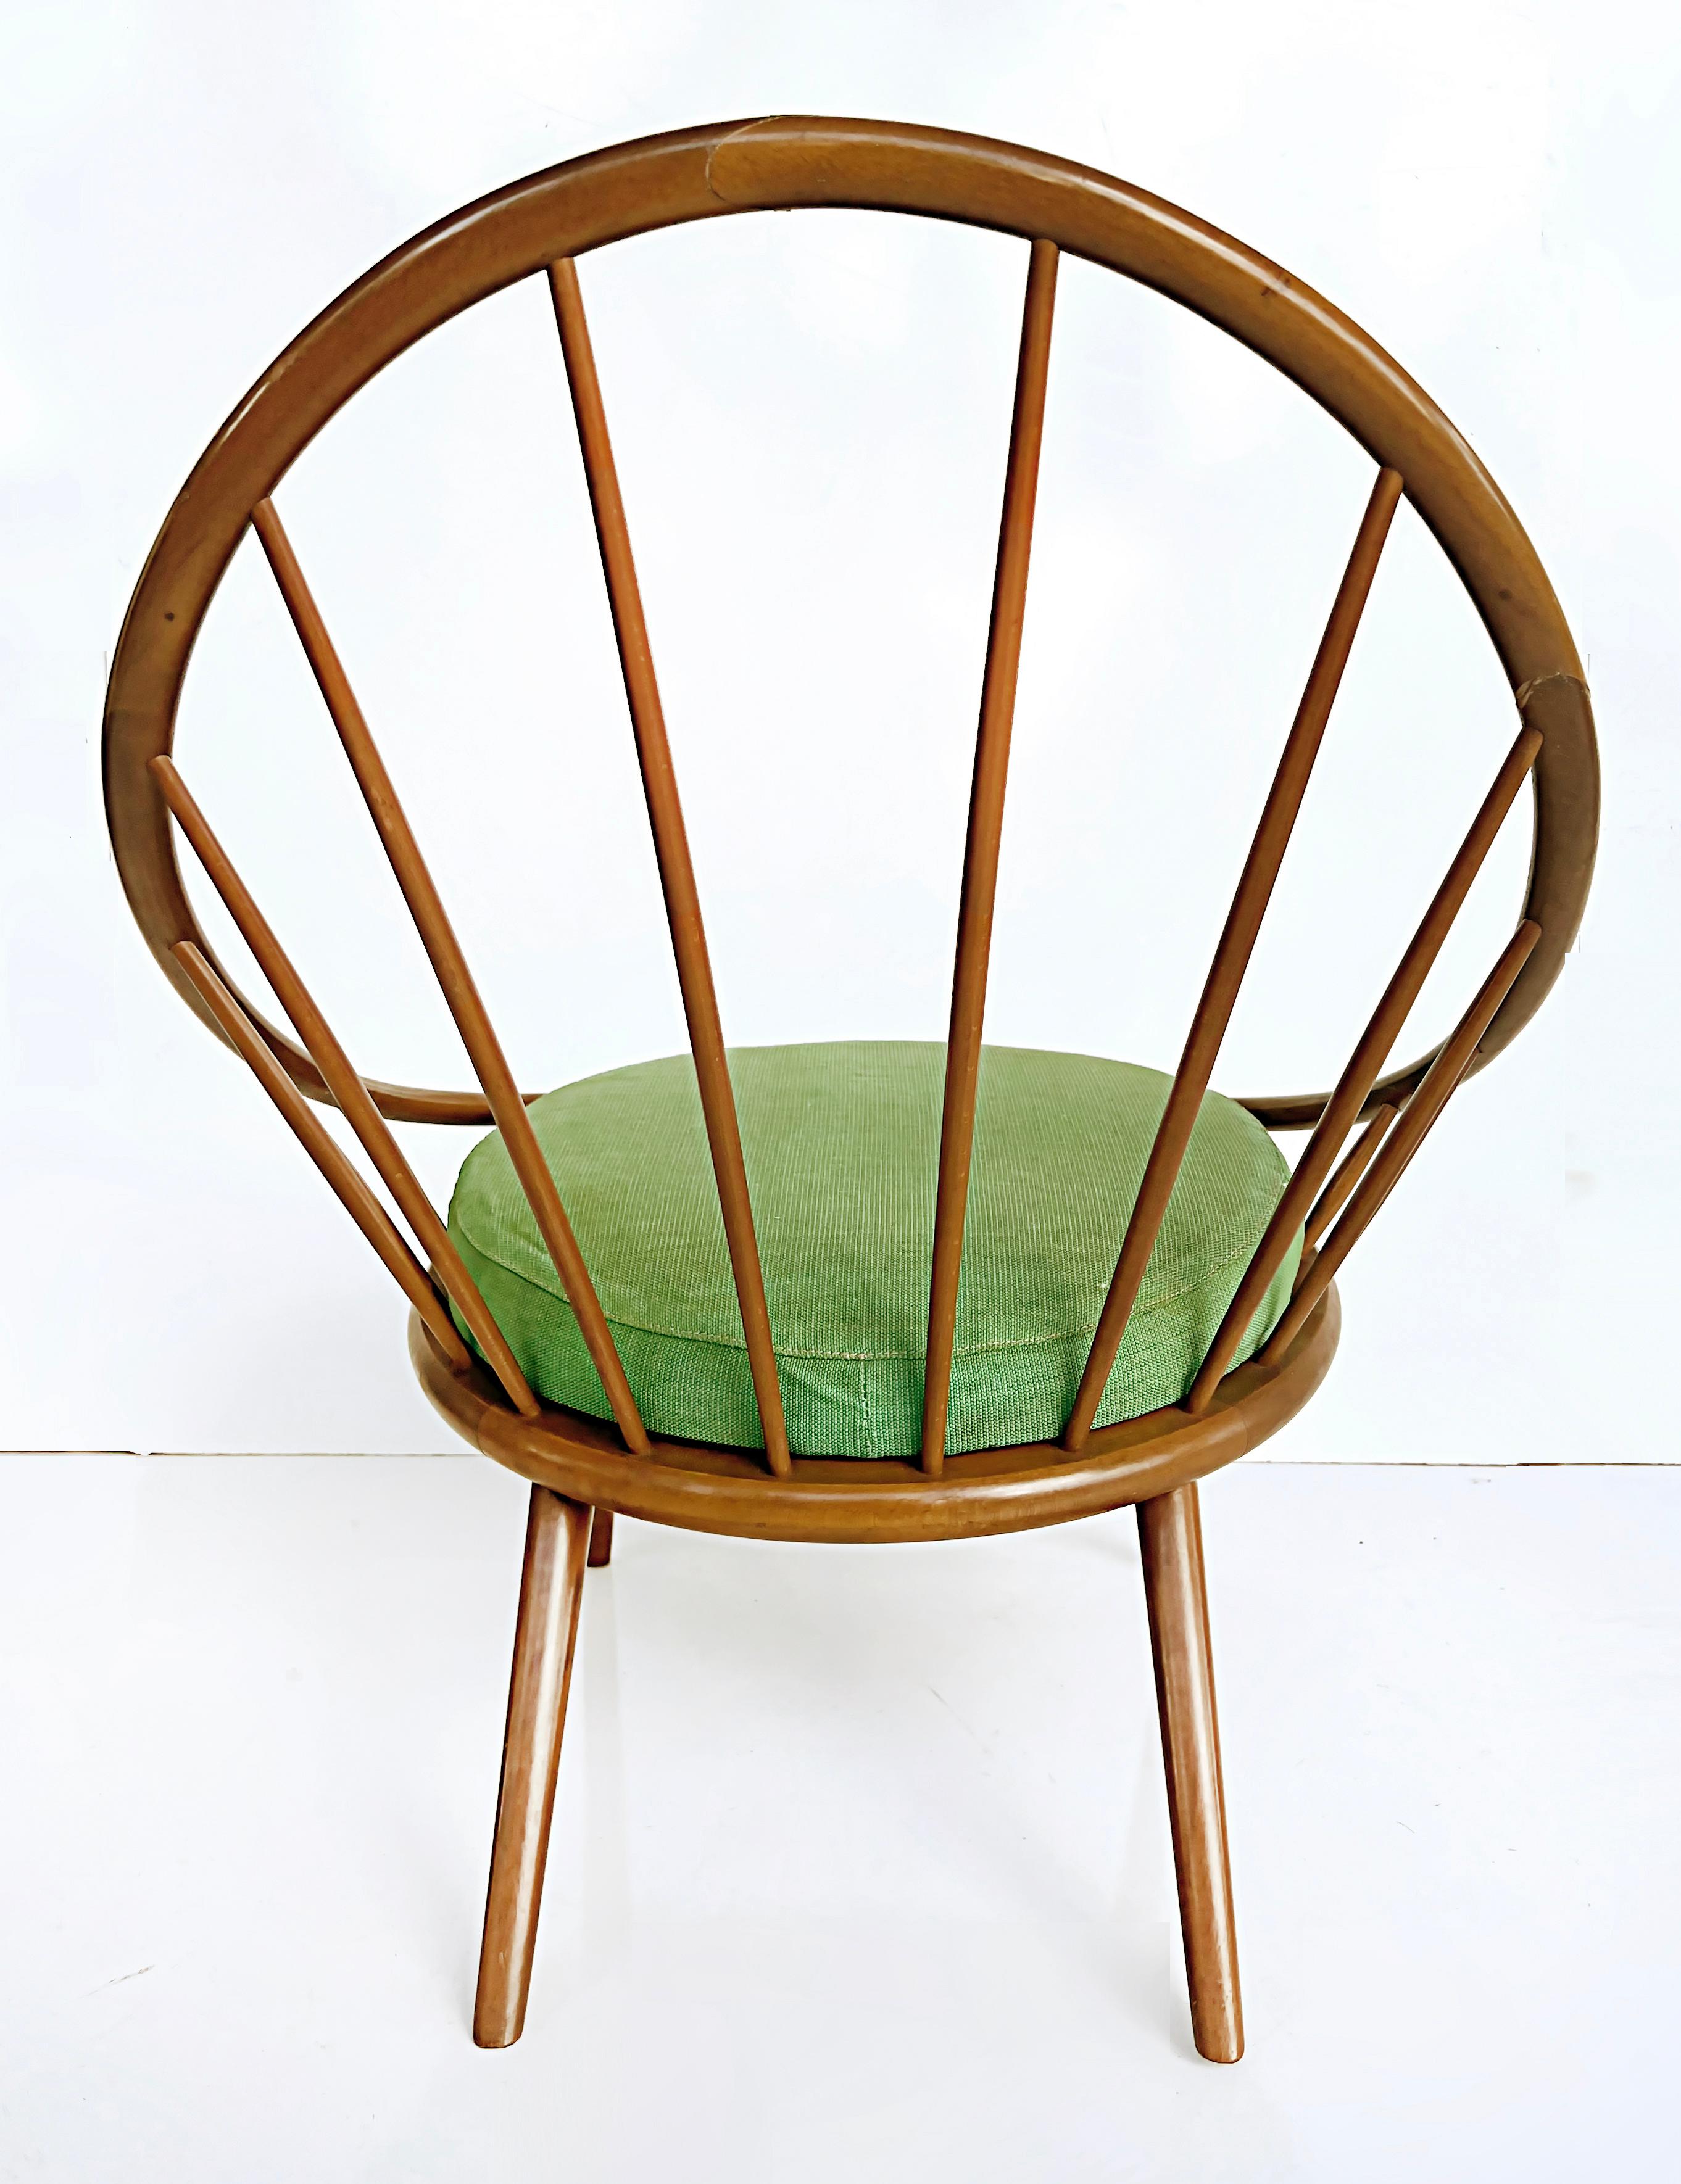 1950s Danish Modern Ib Kofod Larsen for Selig Hoop Chair with Seat Cushion In Good Condition For Sale In Miami, FL